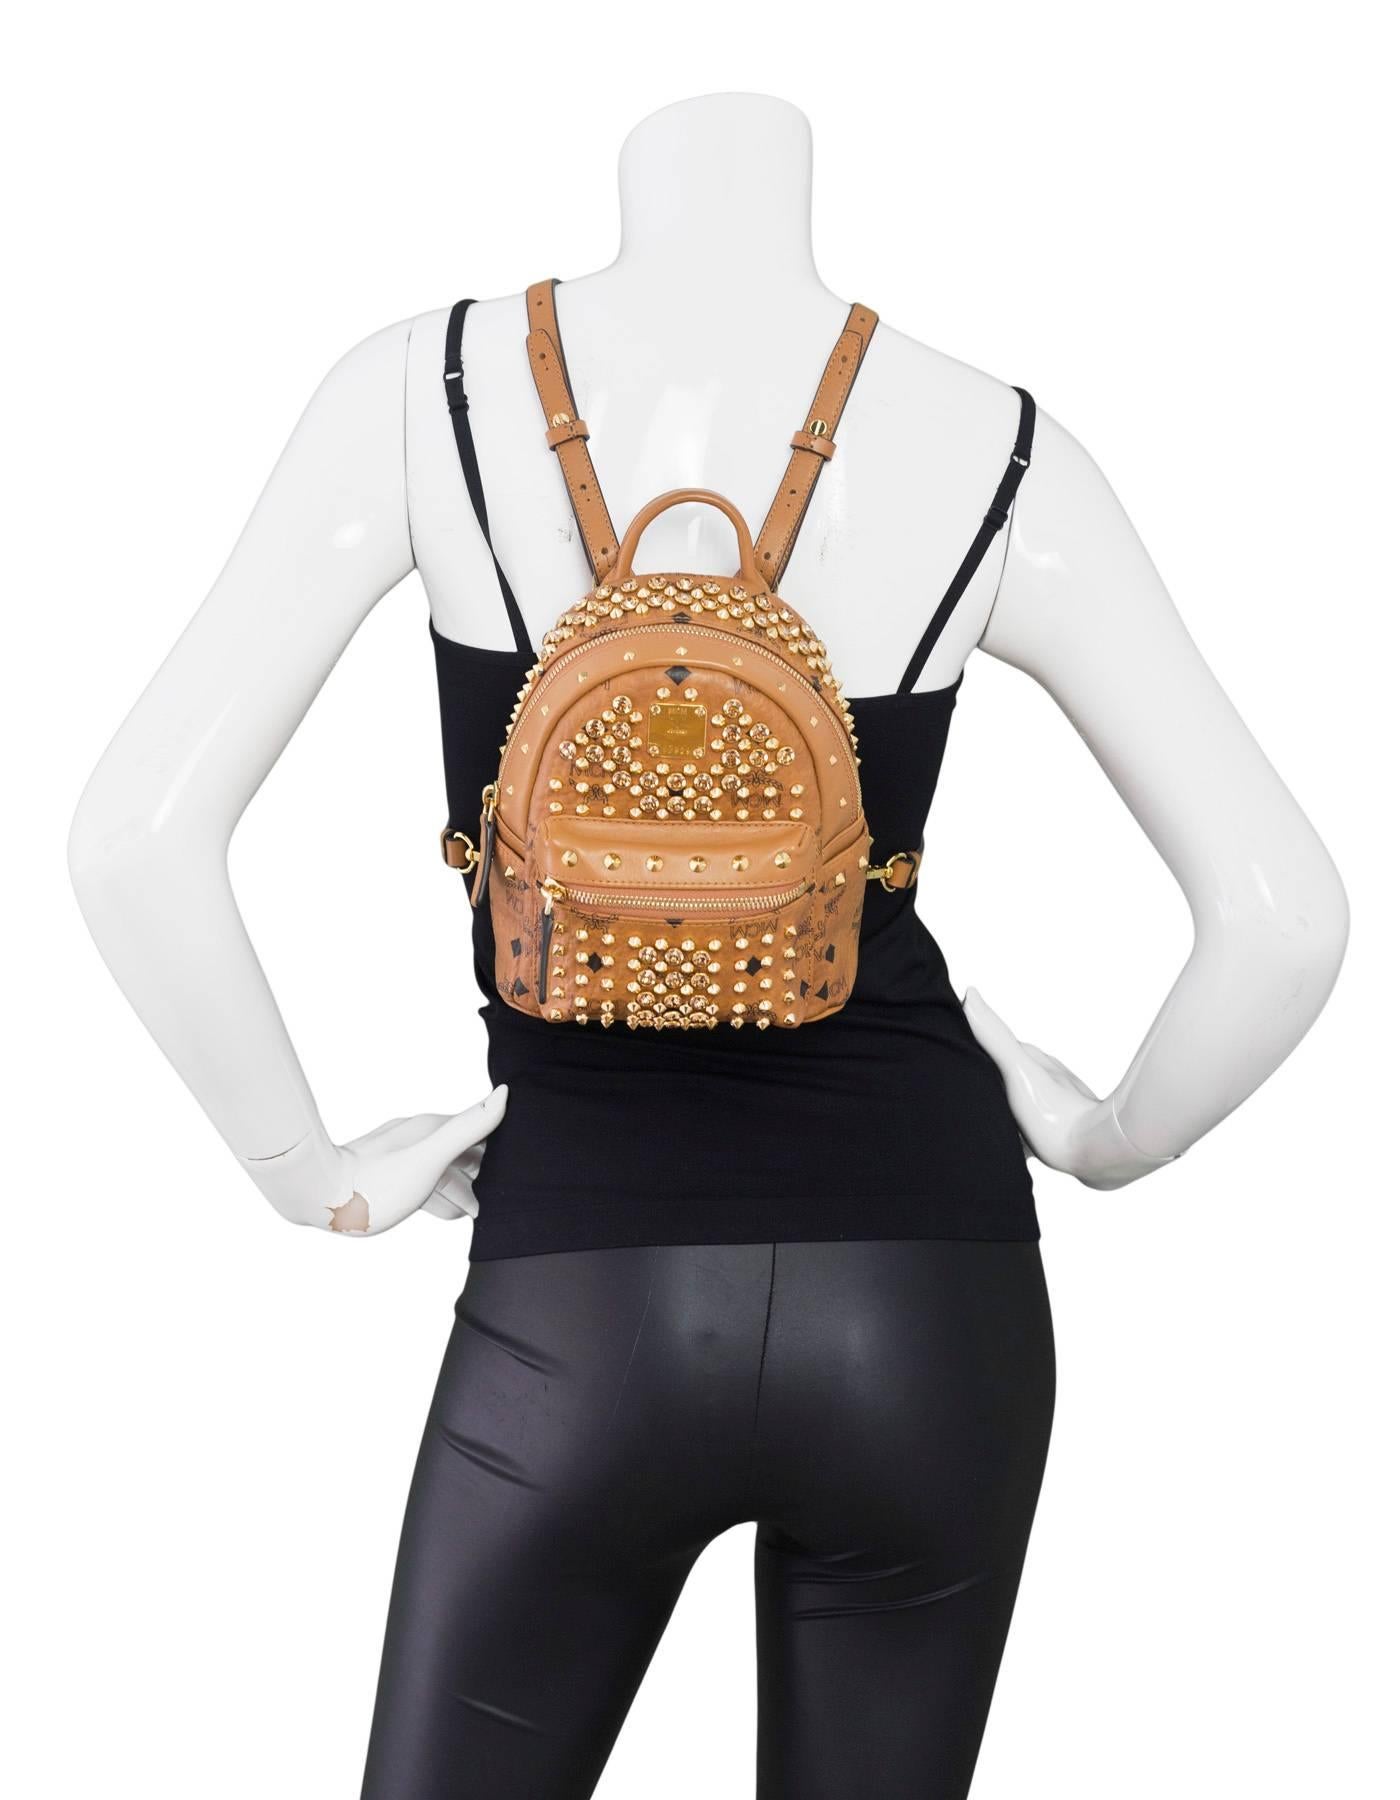 MCM Tan Monogram and Crystal Studded Mini Backpack
Features Swarovski crystals and gold studs throughout

Made In: Korea
Color: Tan, gold
Hardware: Goldtone
Materials: Leather, crystal, metal
Lining: Beige textile
Closure/Opening: Zip top
Exterior